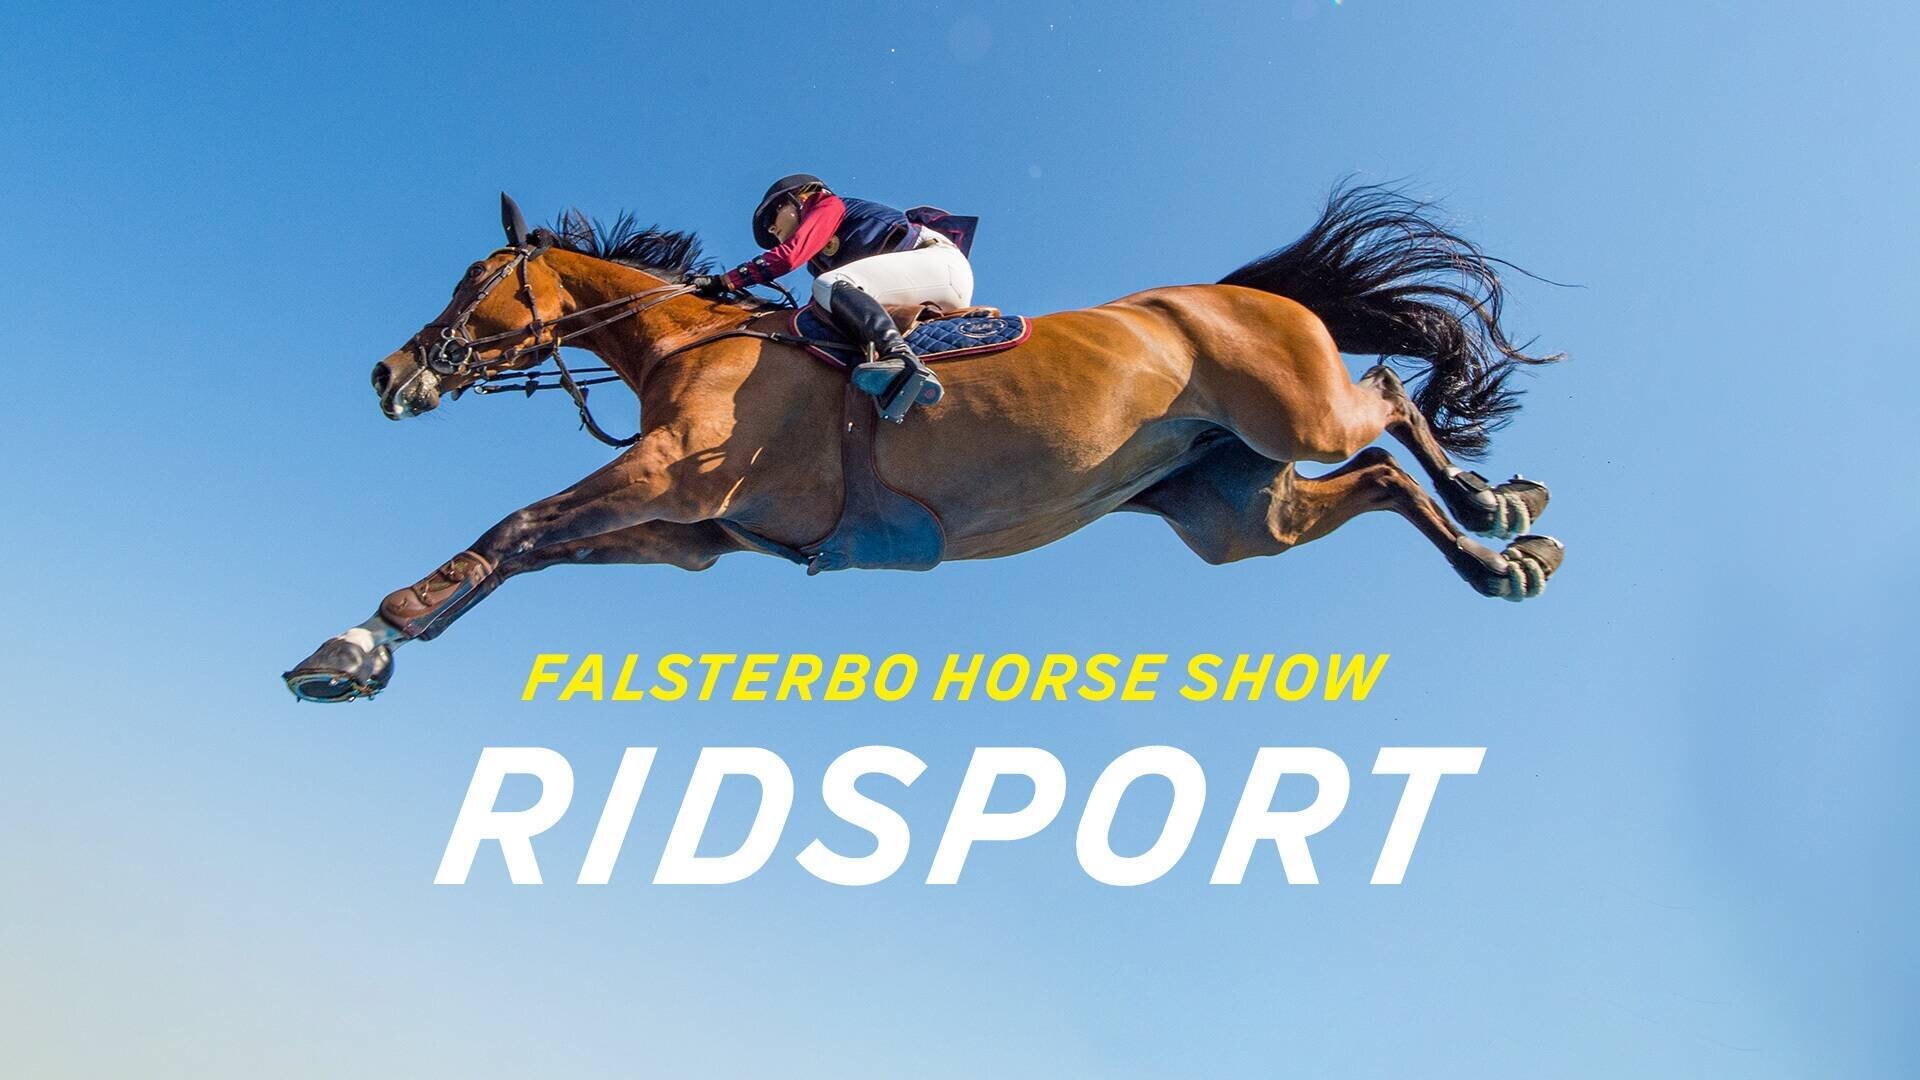 Falsterbo horse show